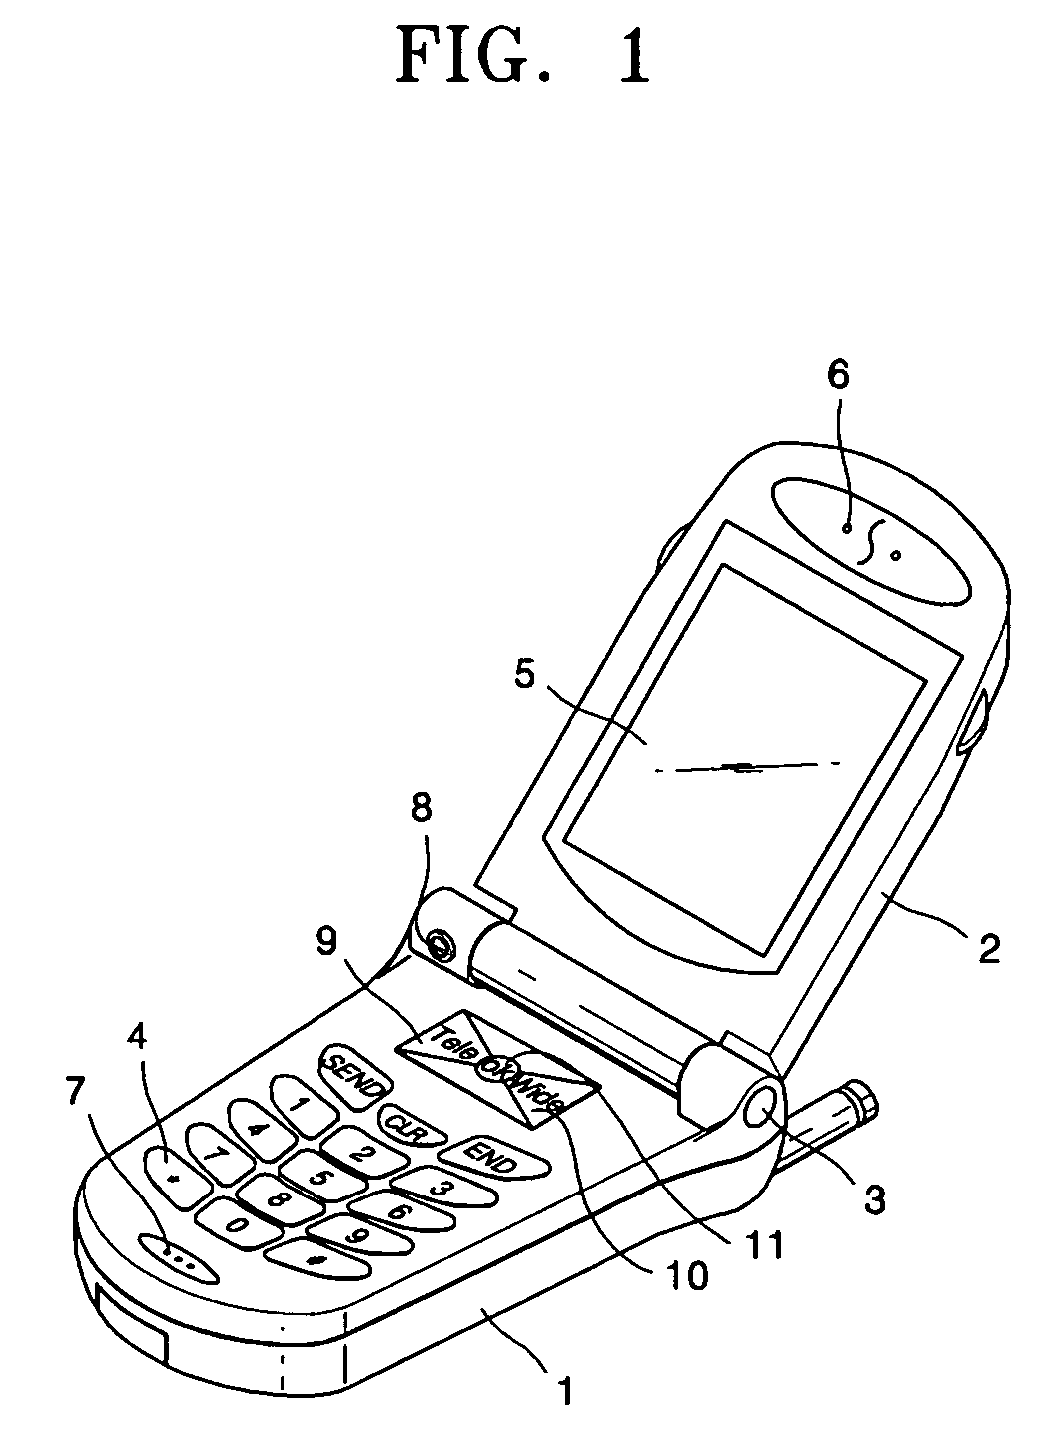 Compact digital zoom camera and cellular phone having the same